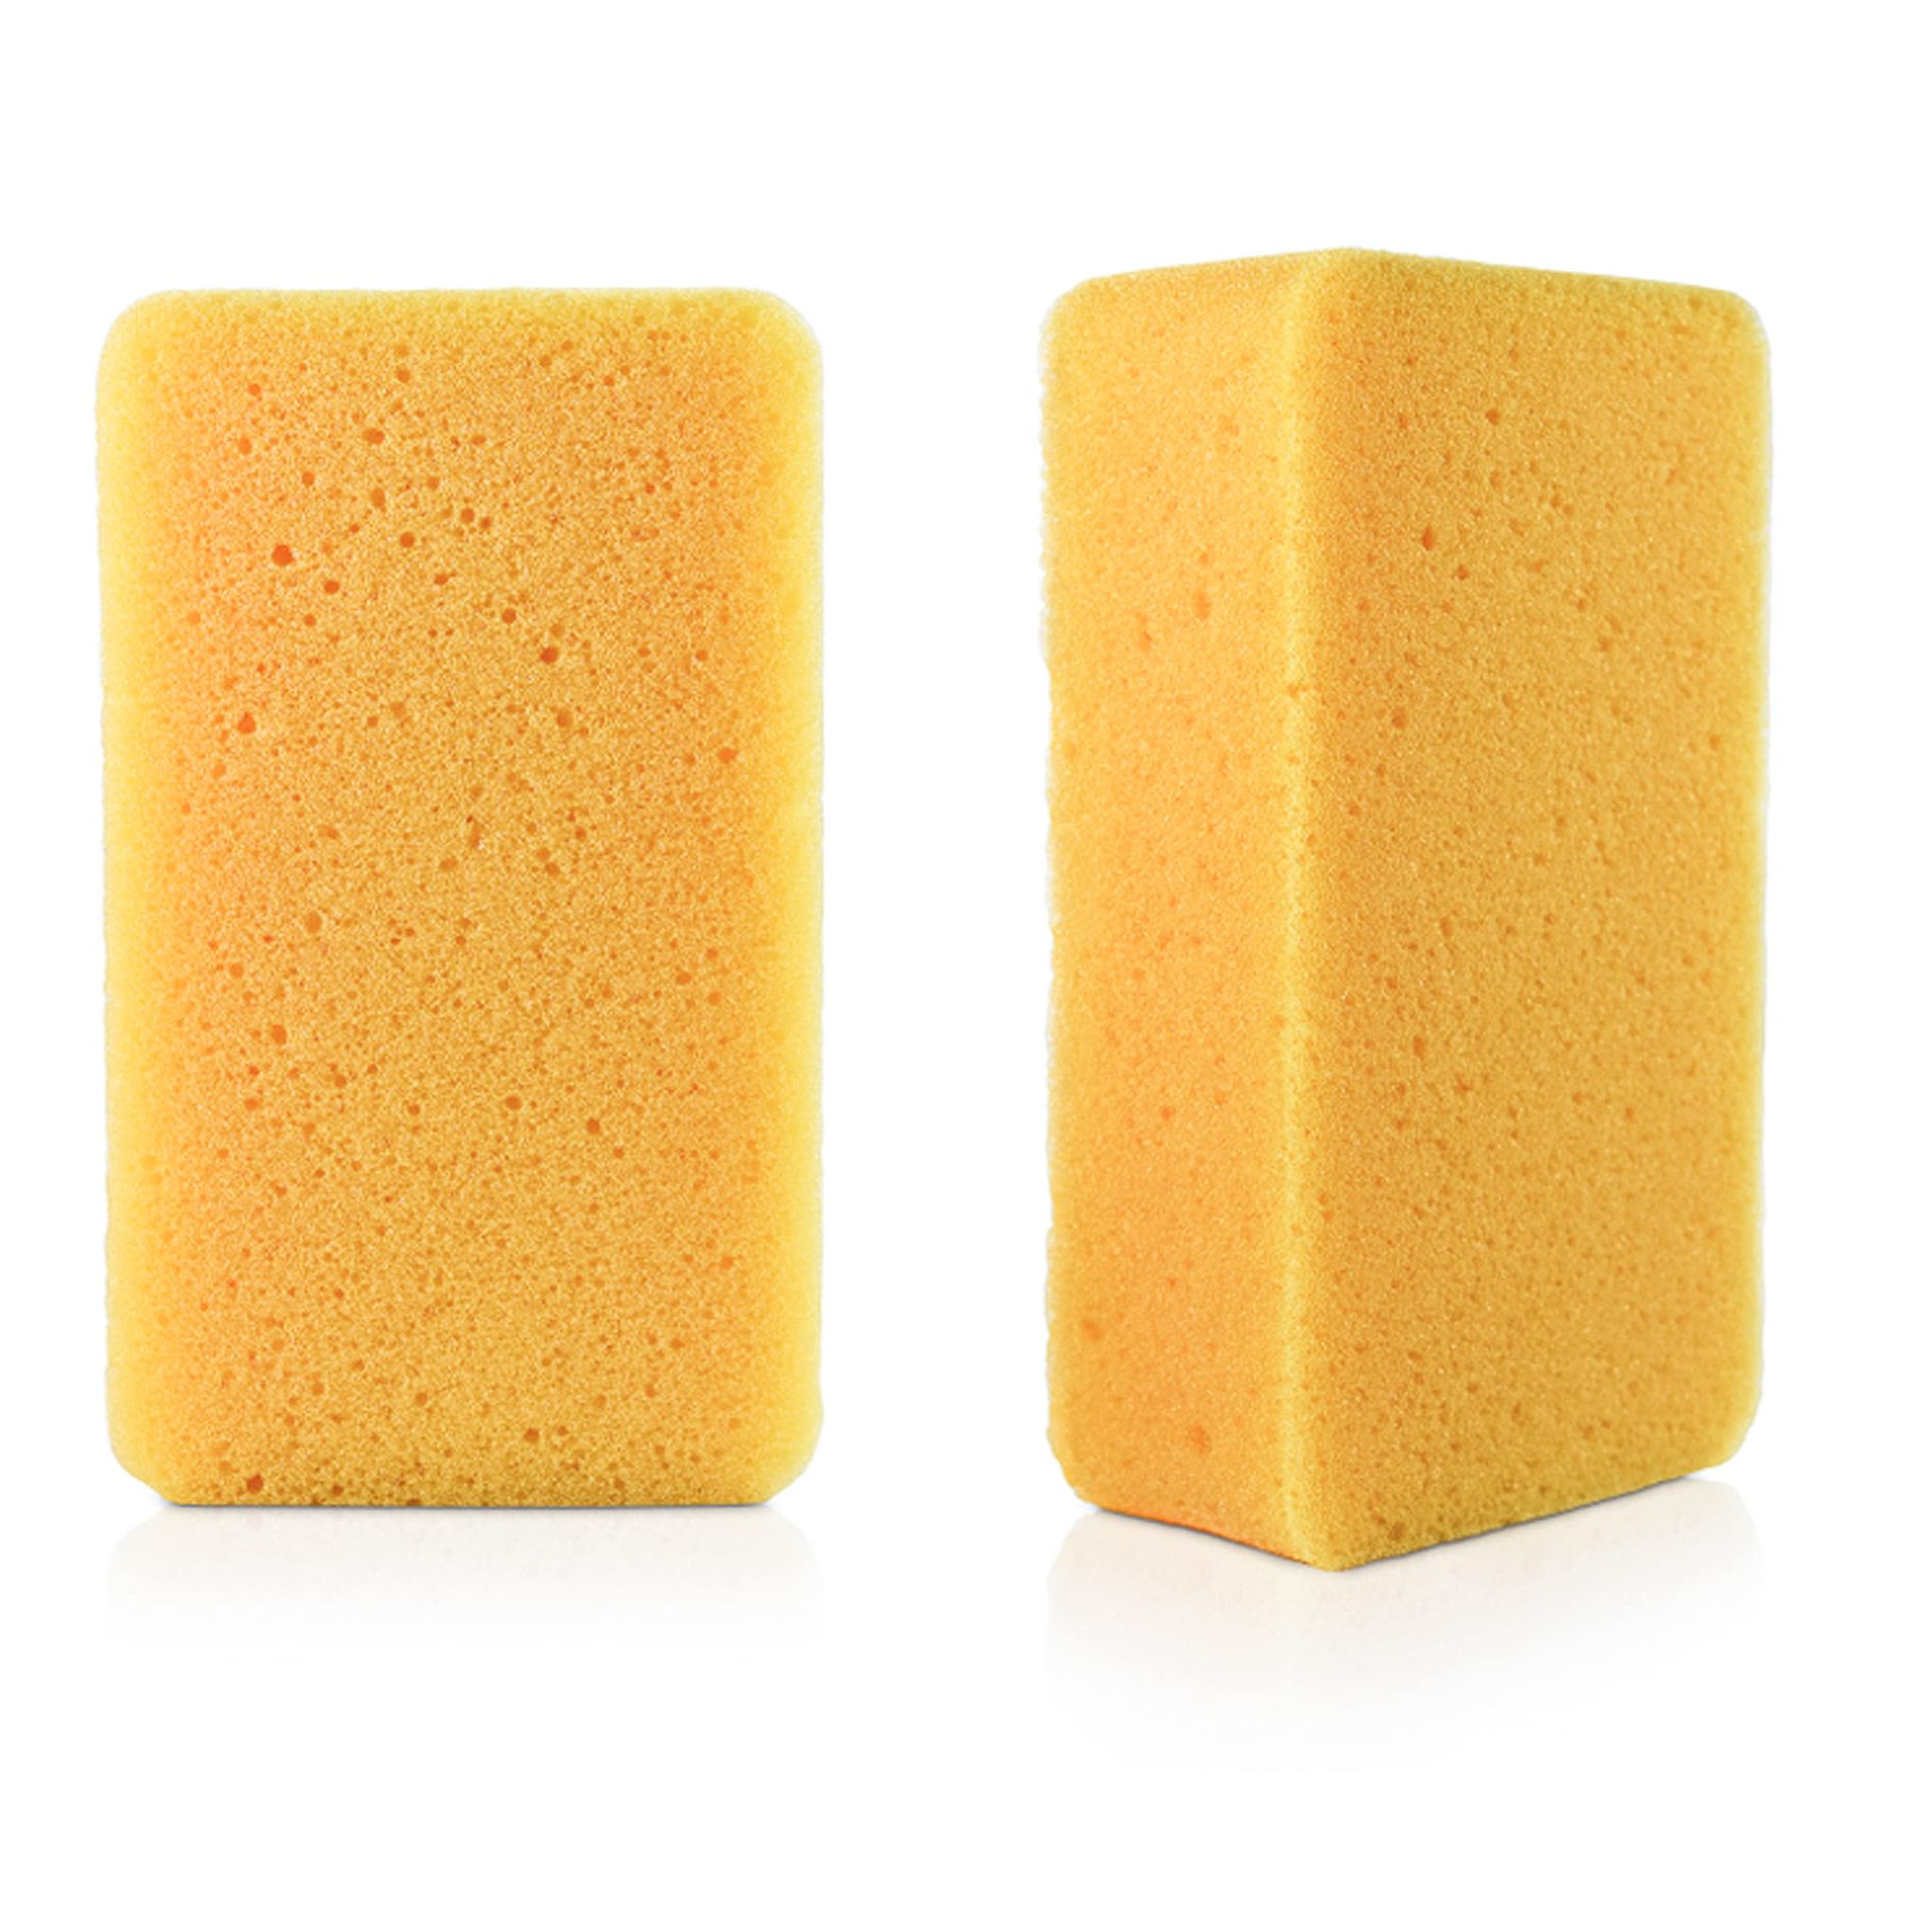 Buildingshop (Pack of 12) Sponges for Wall, Floor Cleaning/Washing with Premium Density